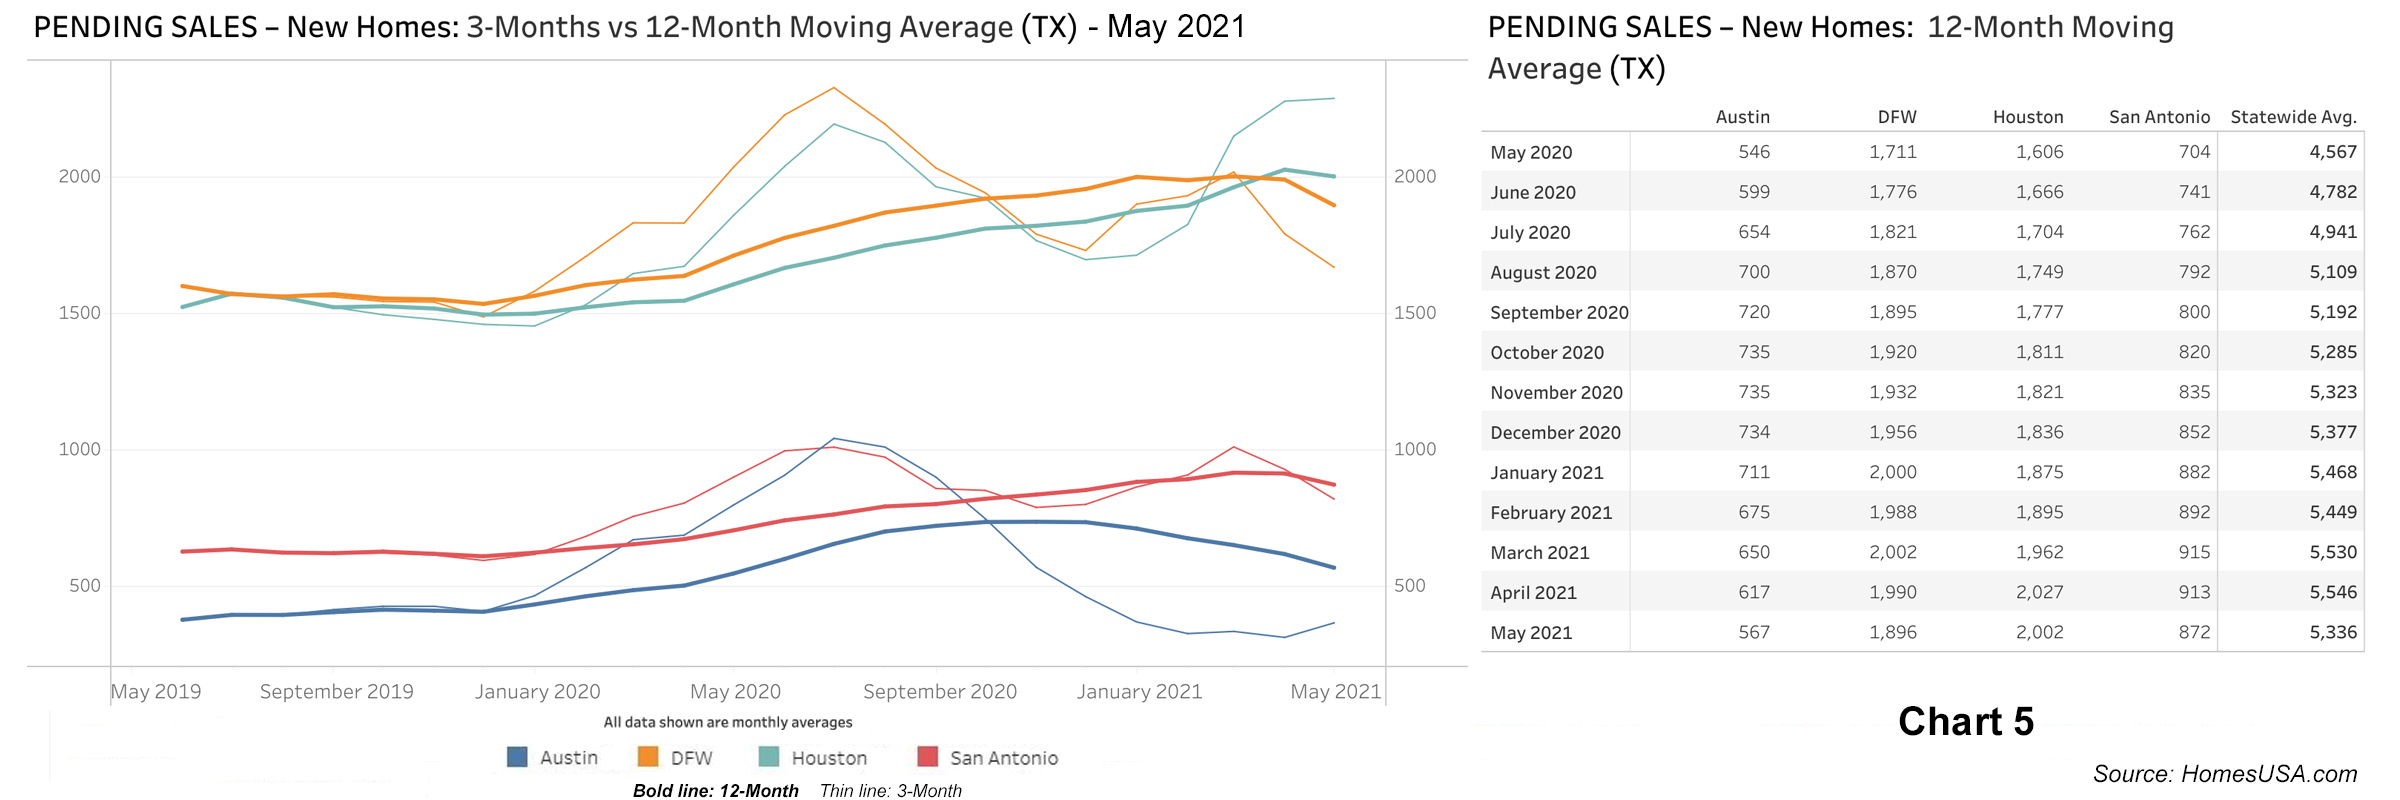 Chart-5-Texas-Pending-New-Home-Sales